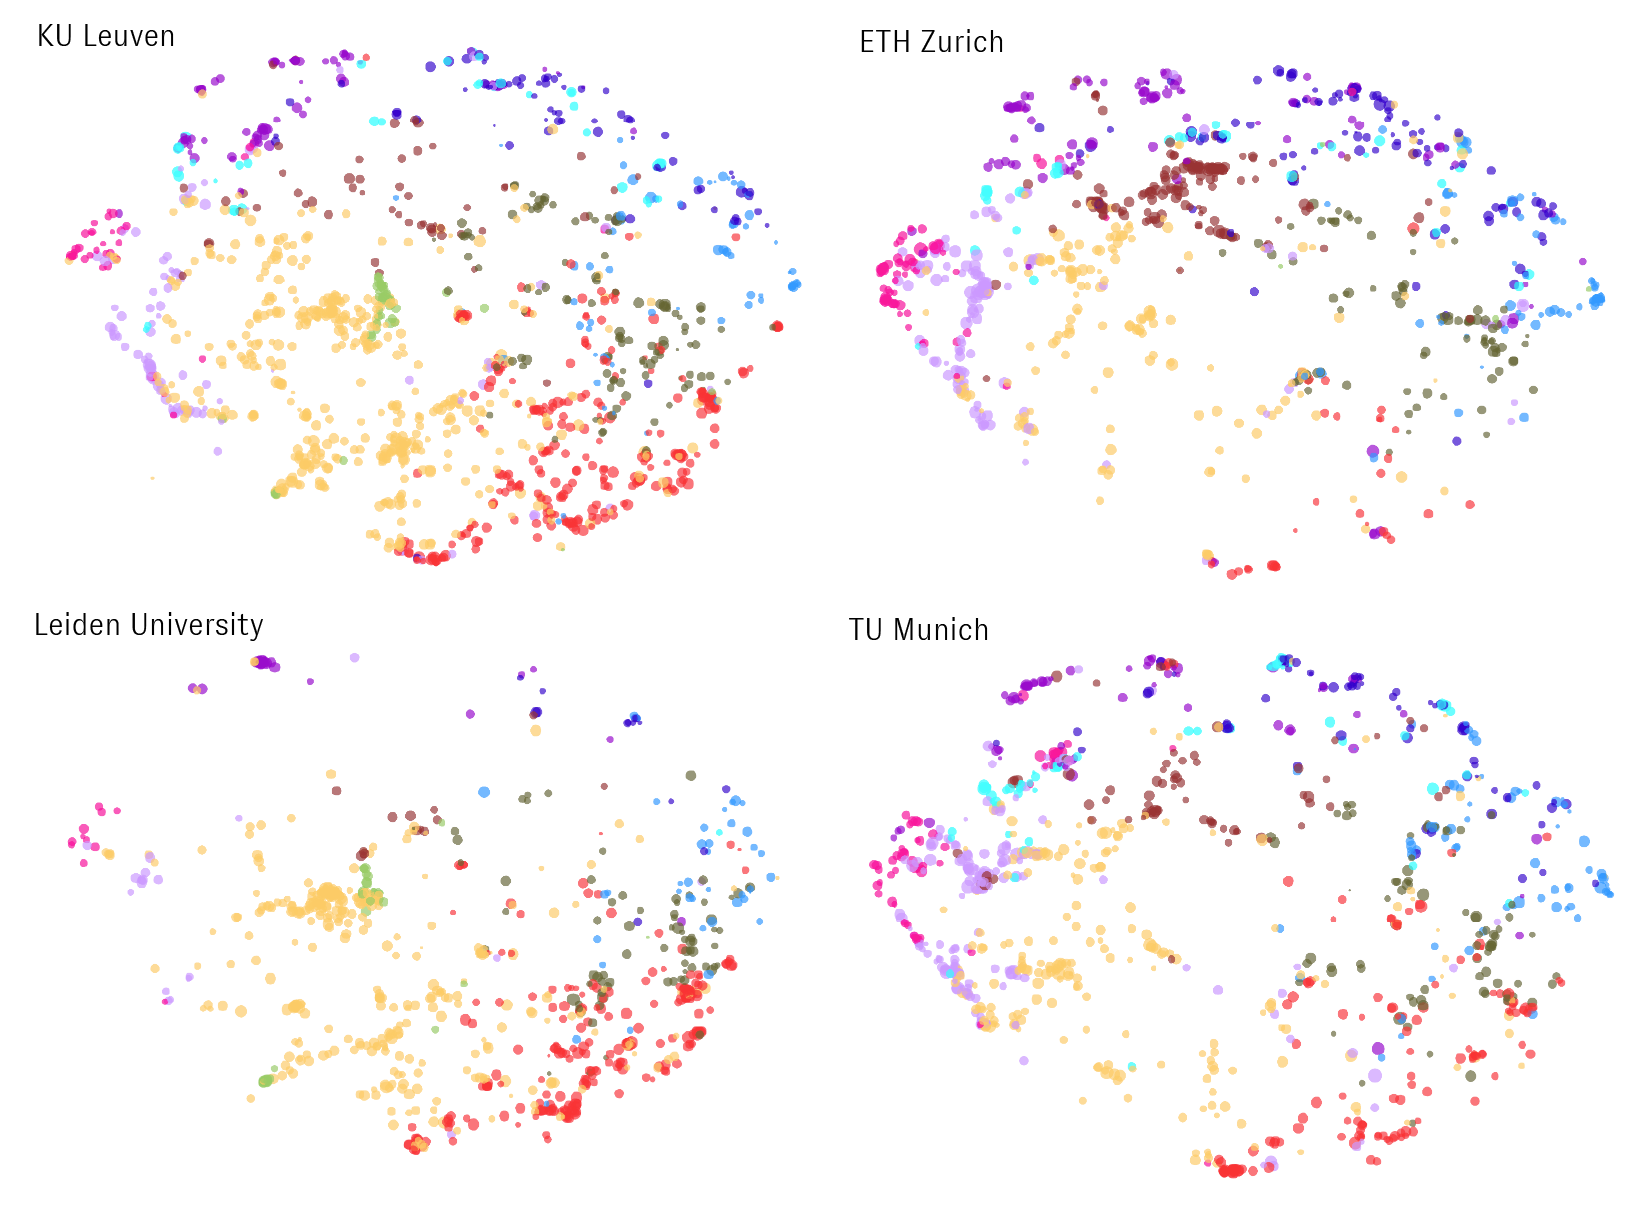 Four screenshots of the Map of Science corresponding to four different universities: KU Leuven, ETH Zurich, Leiden University, and TU Munich. Each school's map displays a notably different spatial pattern of colorful dots.